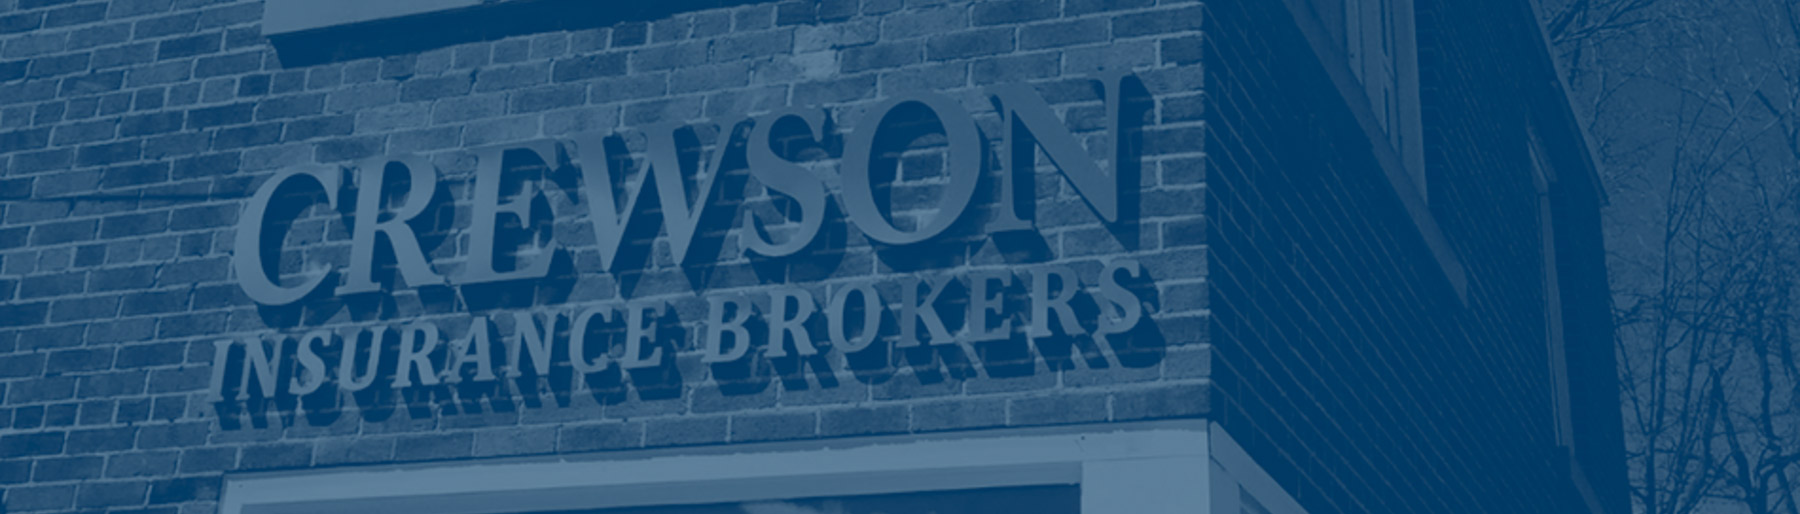 About Crewson Insurance